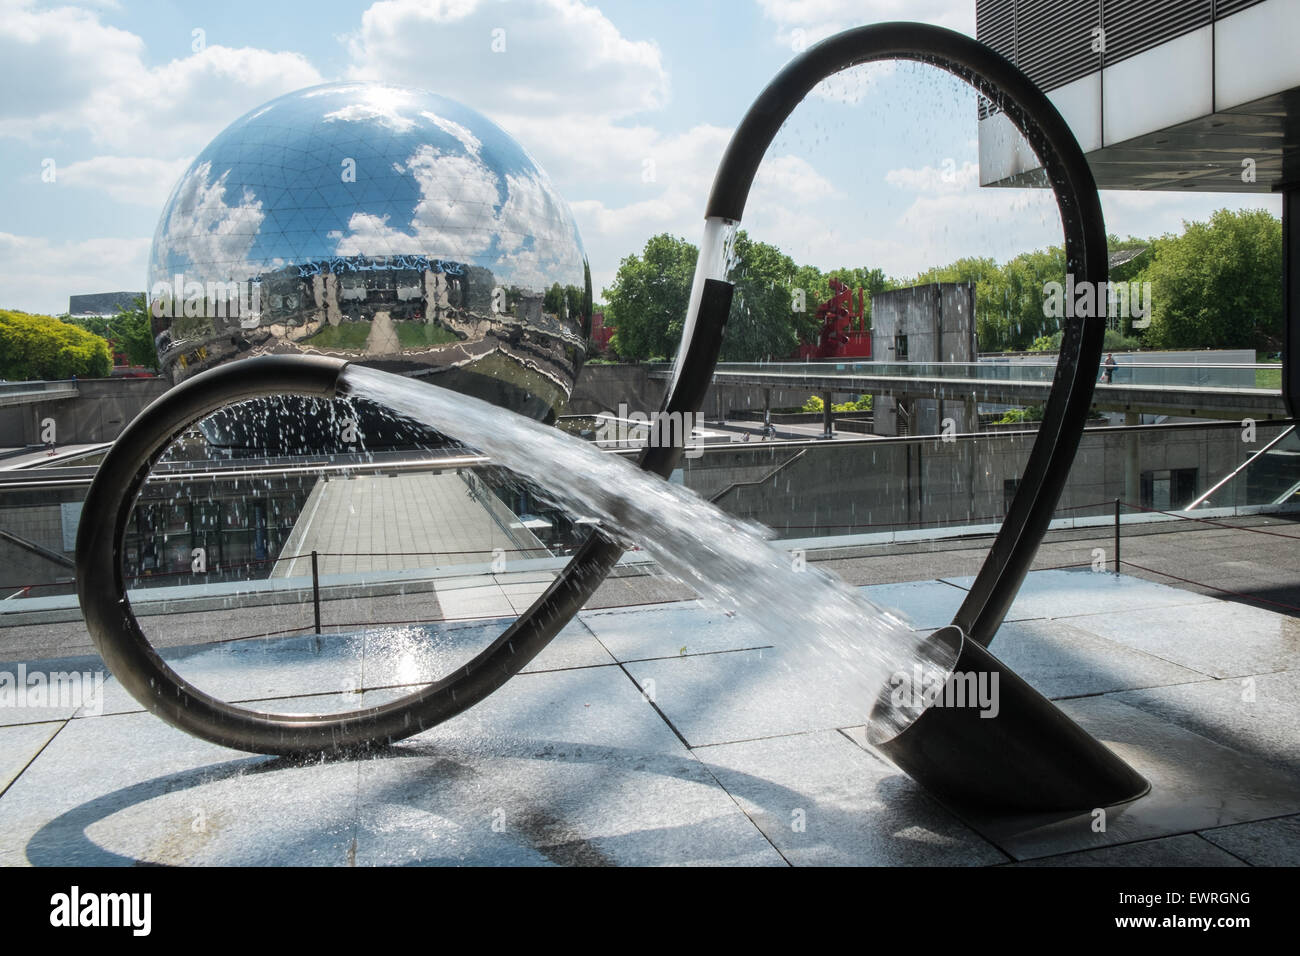 Parc de la Villette,science and cultural zone,district, including City of Science and industry,gardens,follies,concert venues. Stock Photo